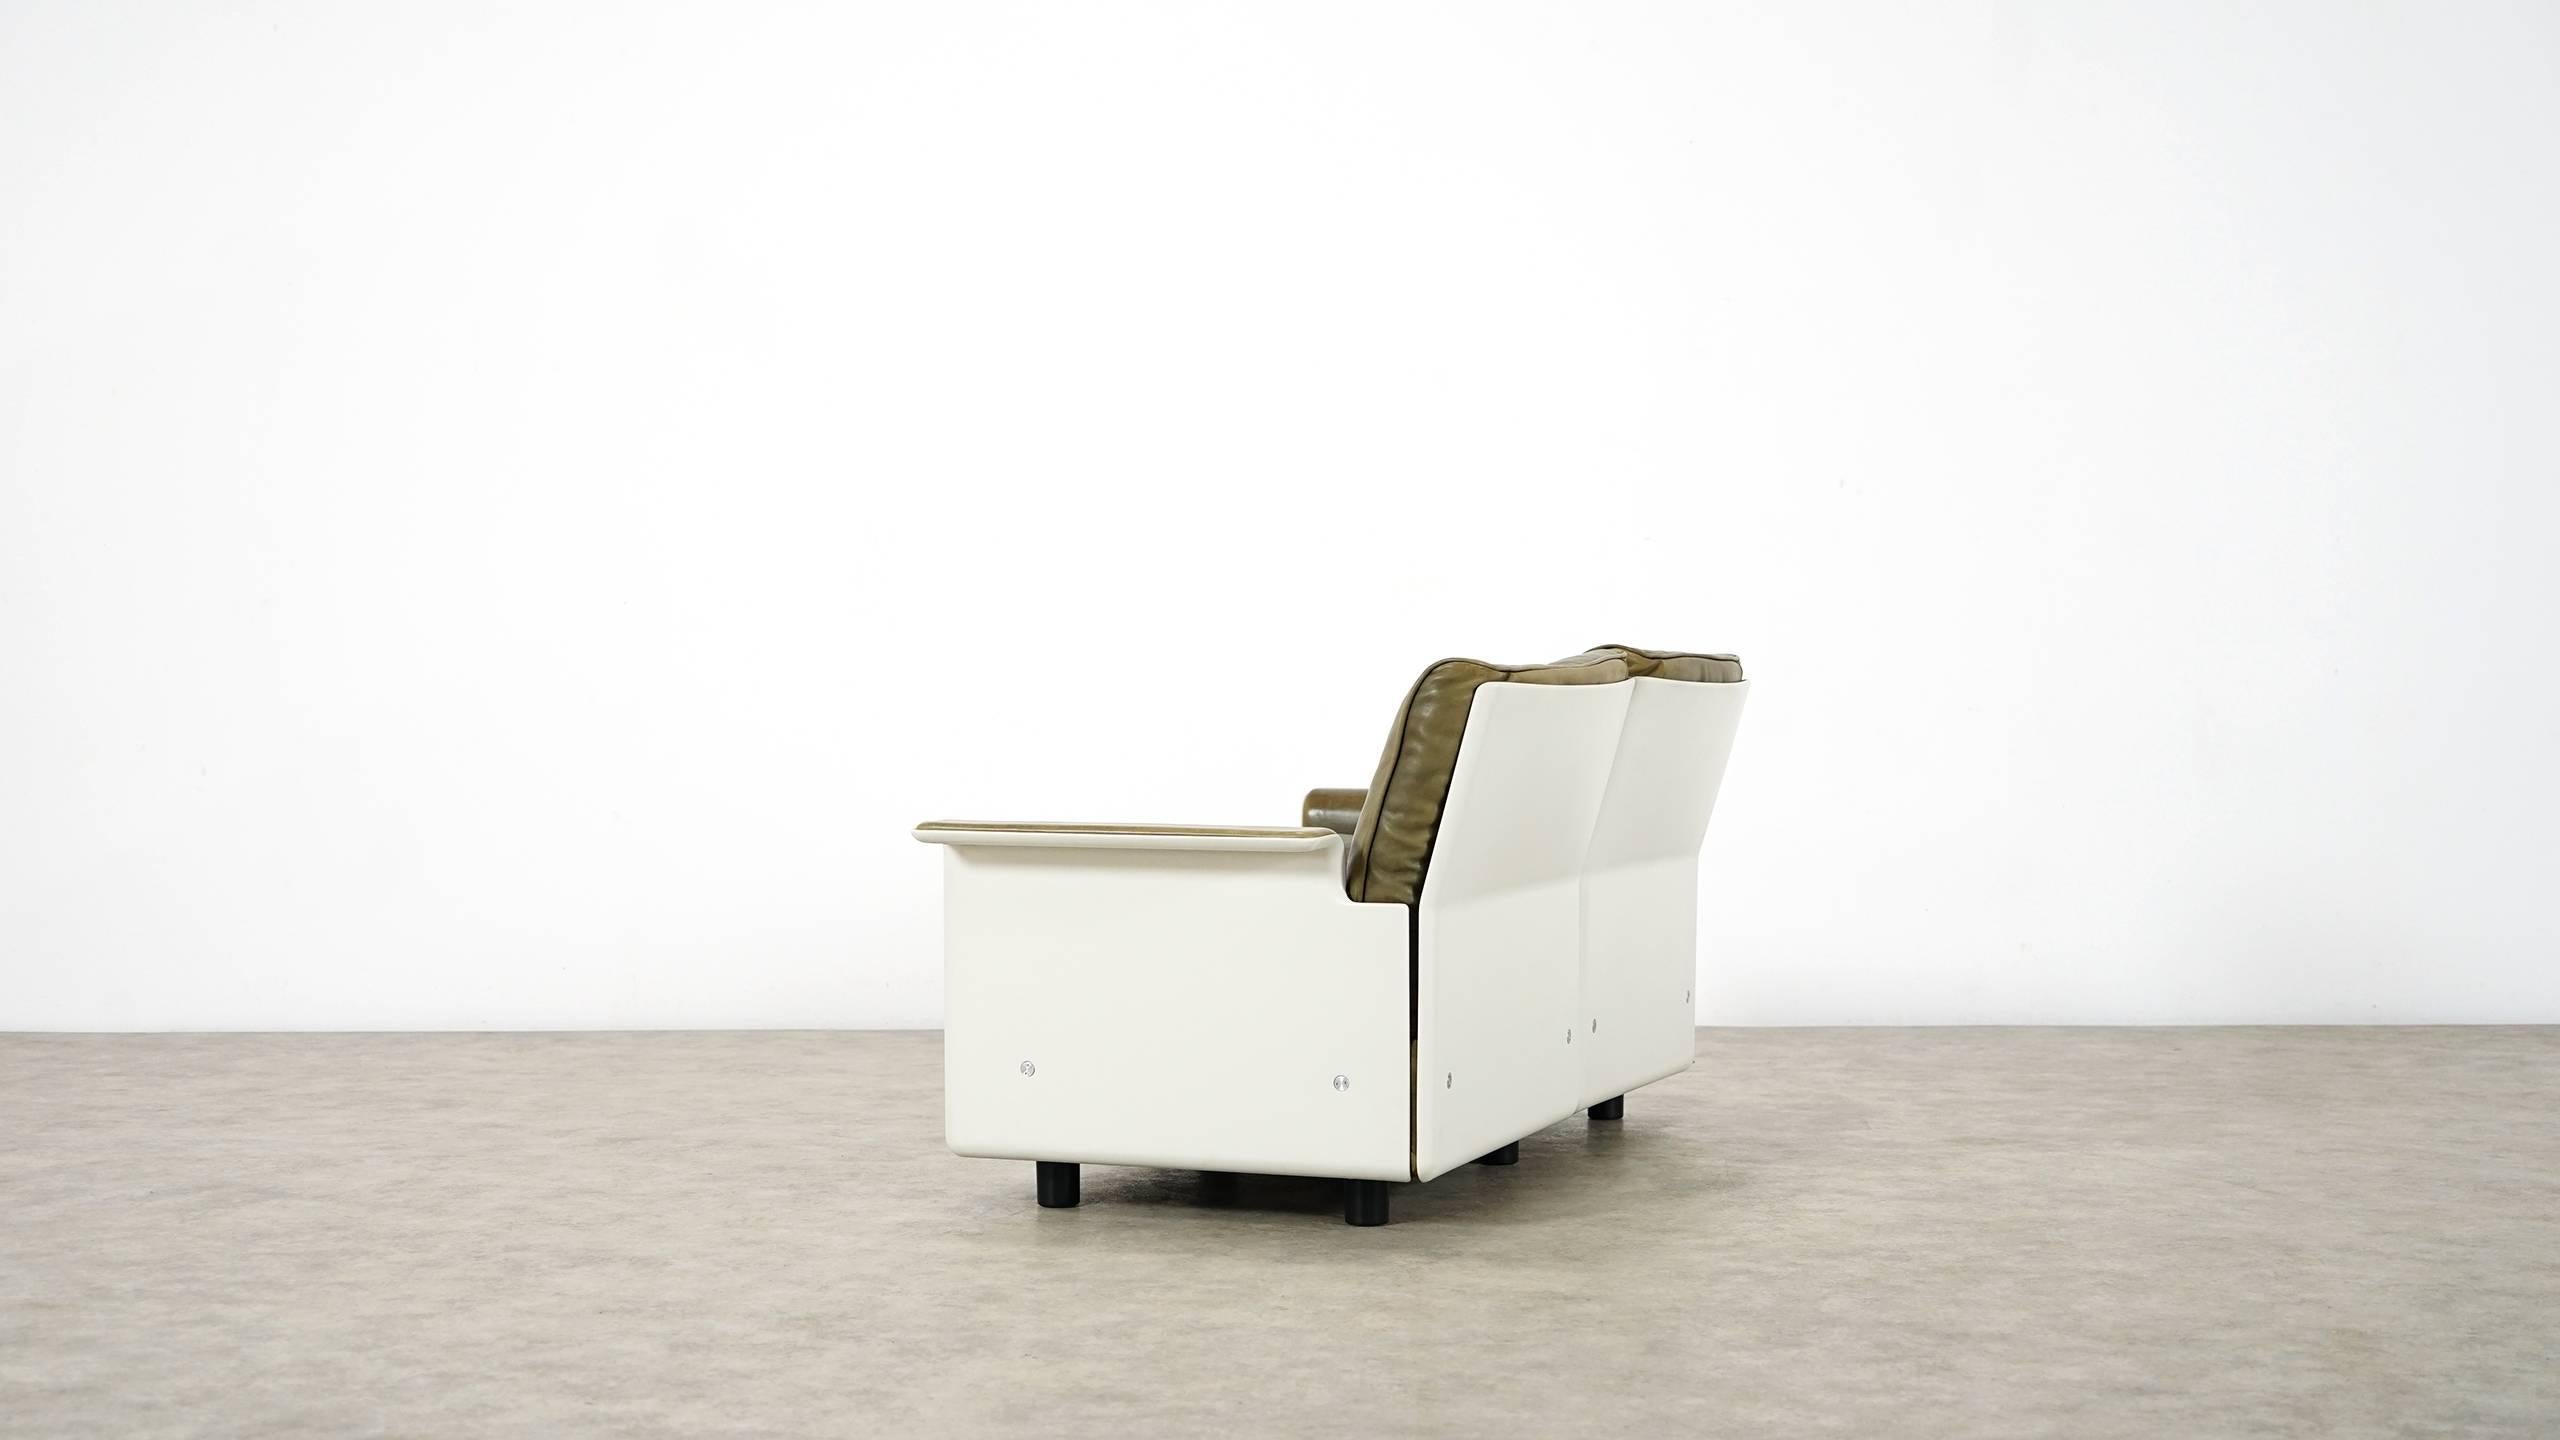 Mid-20th Century Dieter Rams, Sofa RZ 62 in Olivgreen Leather by Vitsœ, Two-Seat